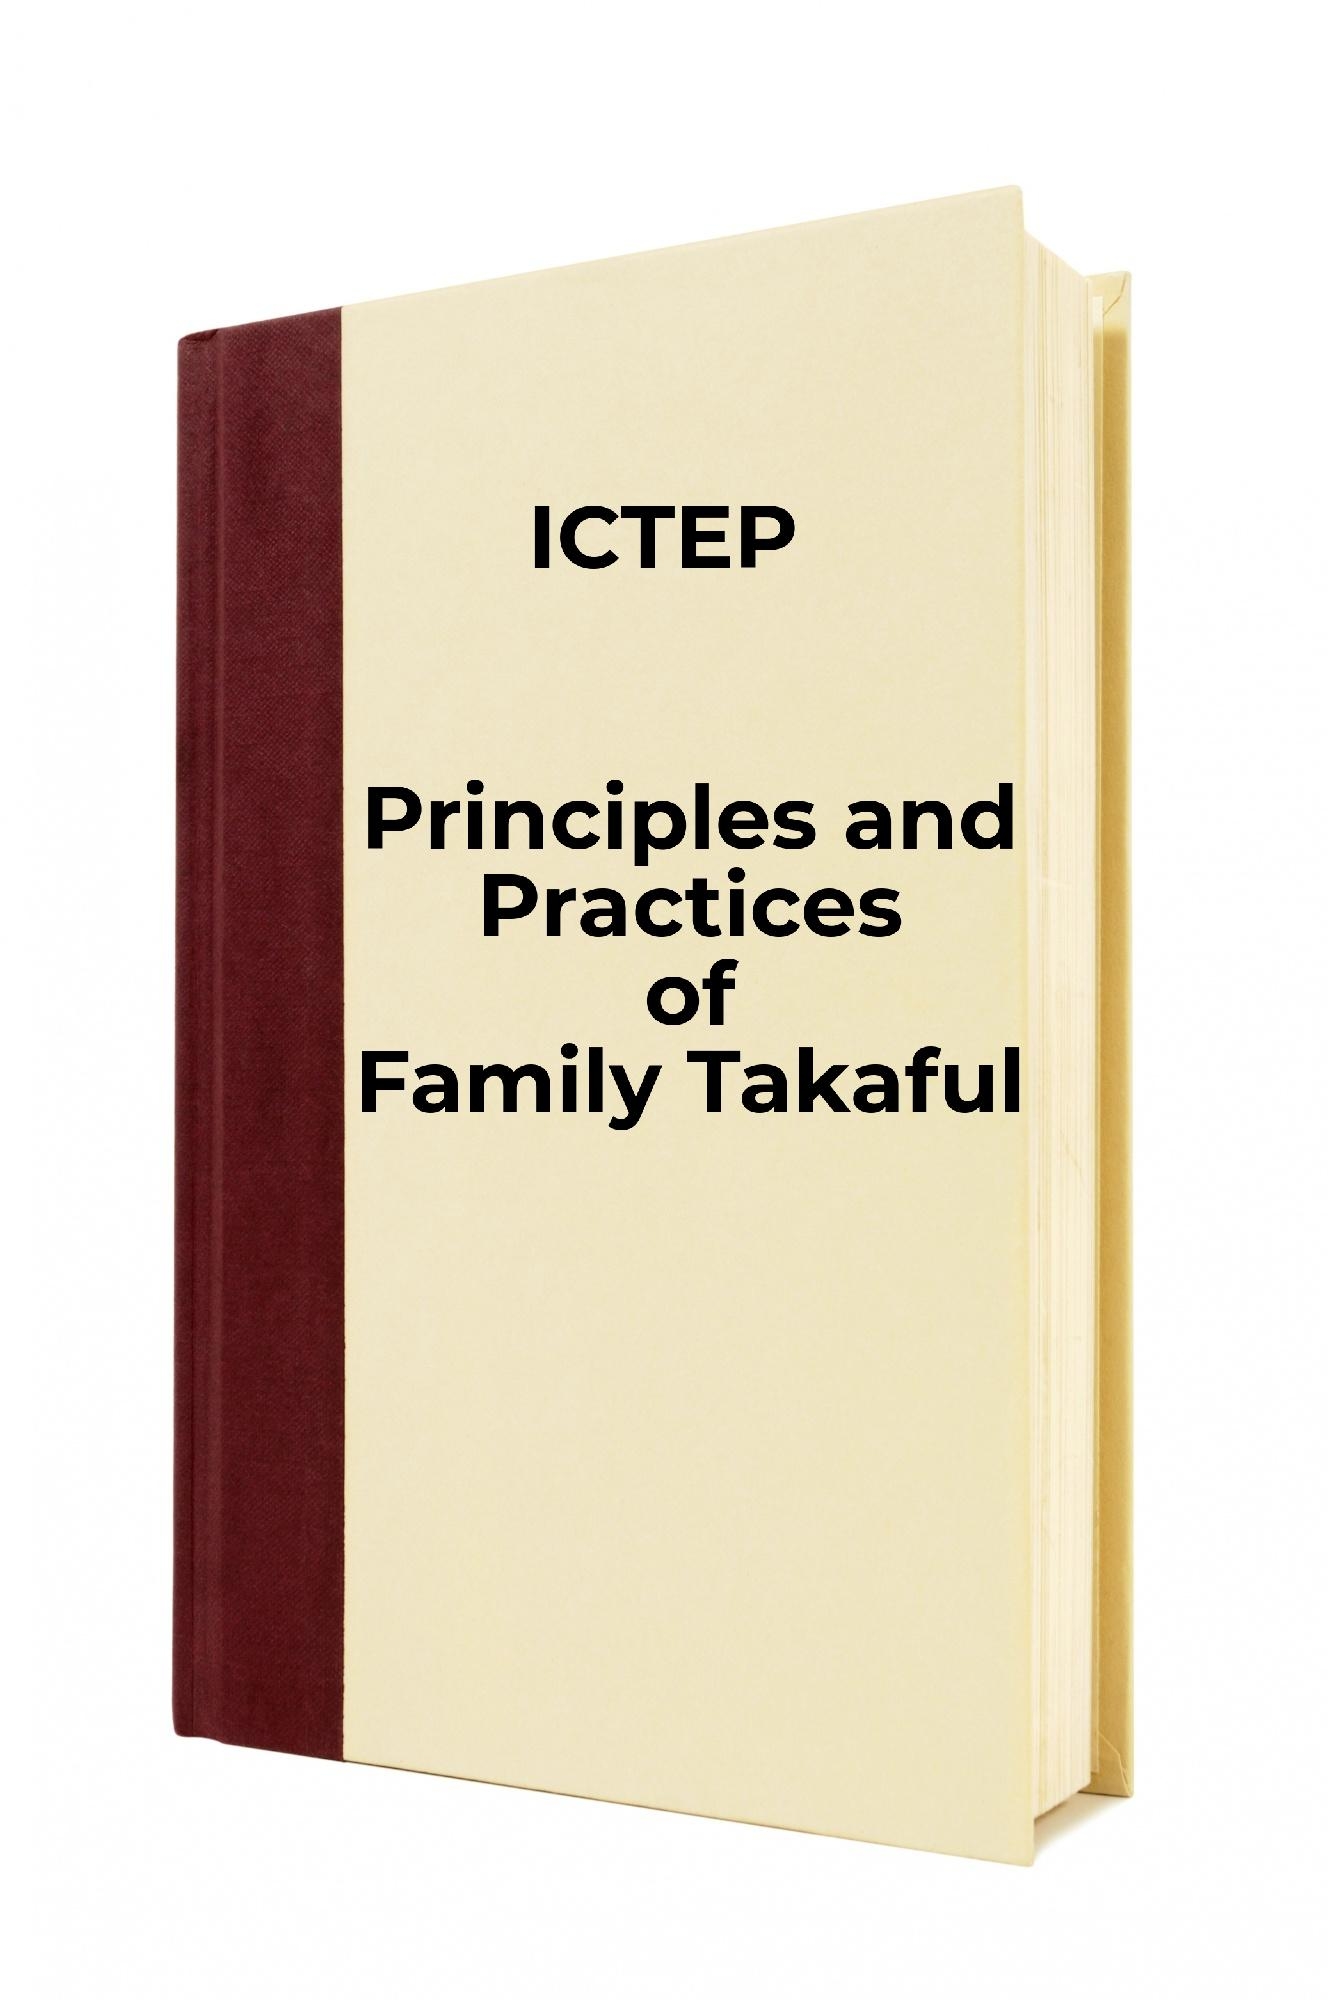 Module 3: Principles and Practices of Family Takaful